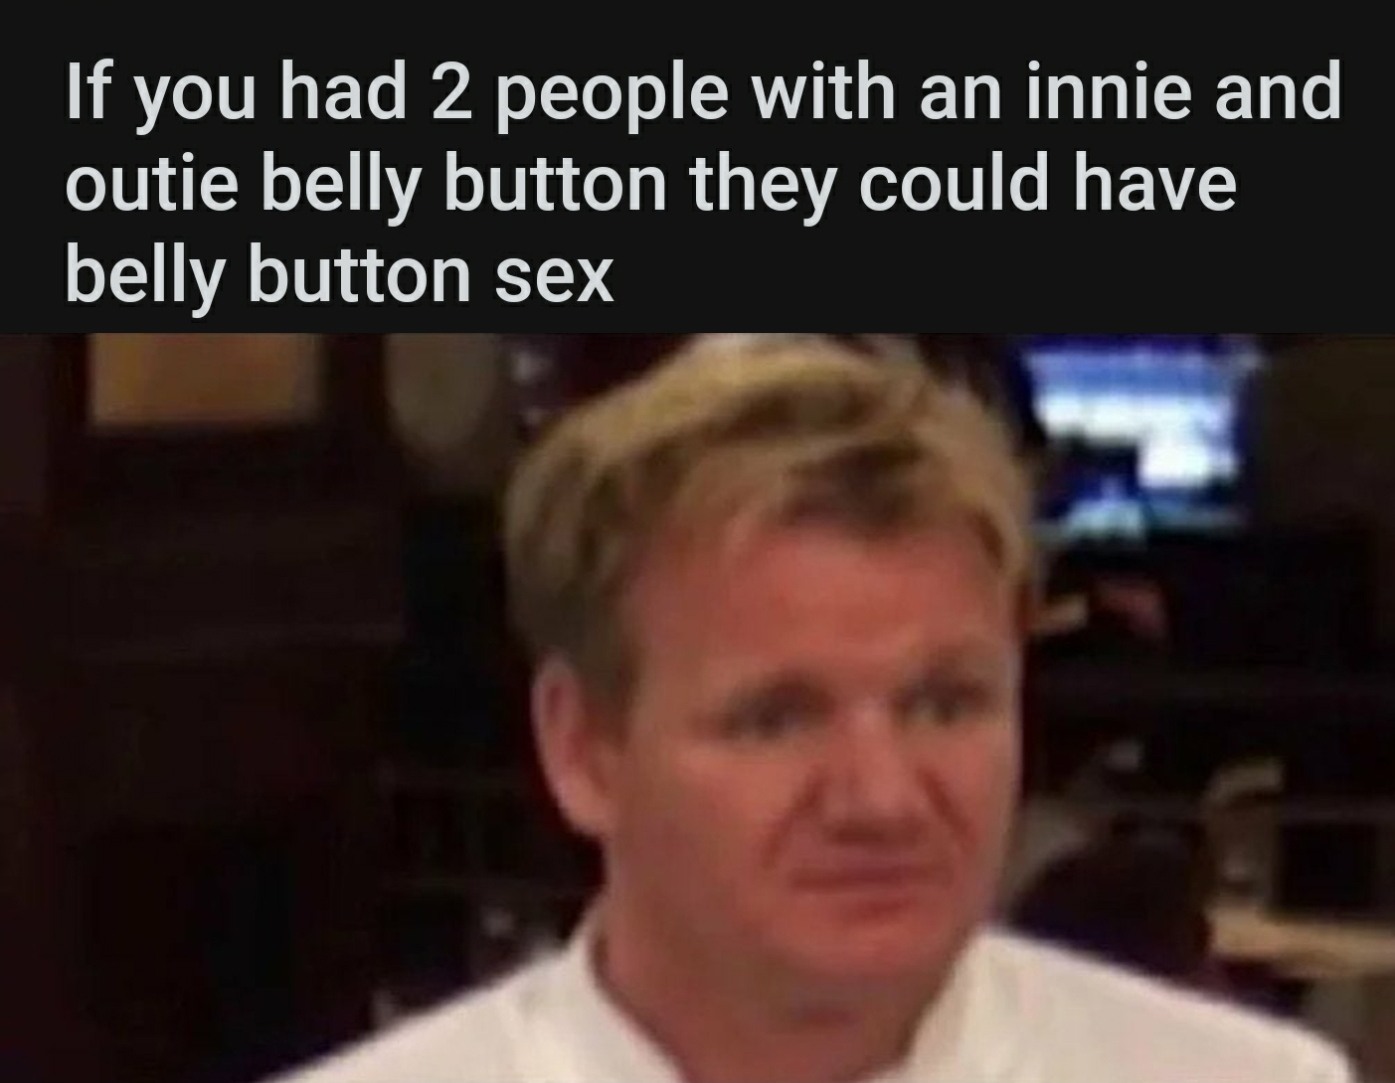 funny memes - dank memes gagging meme - If you had 2 people with an innie and outie belly button they could have belly button sex